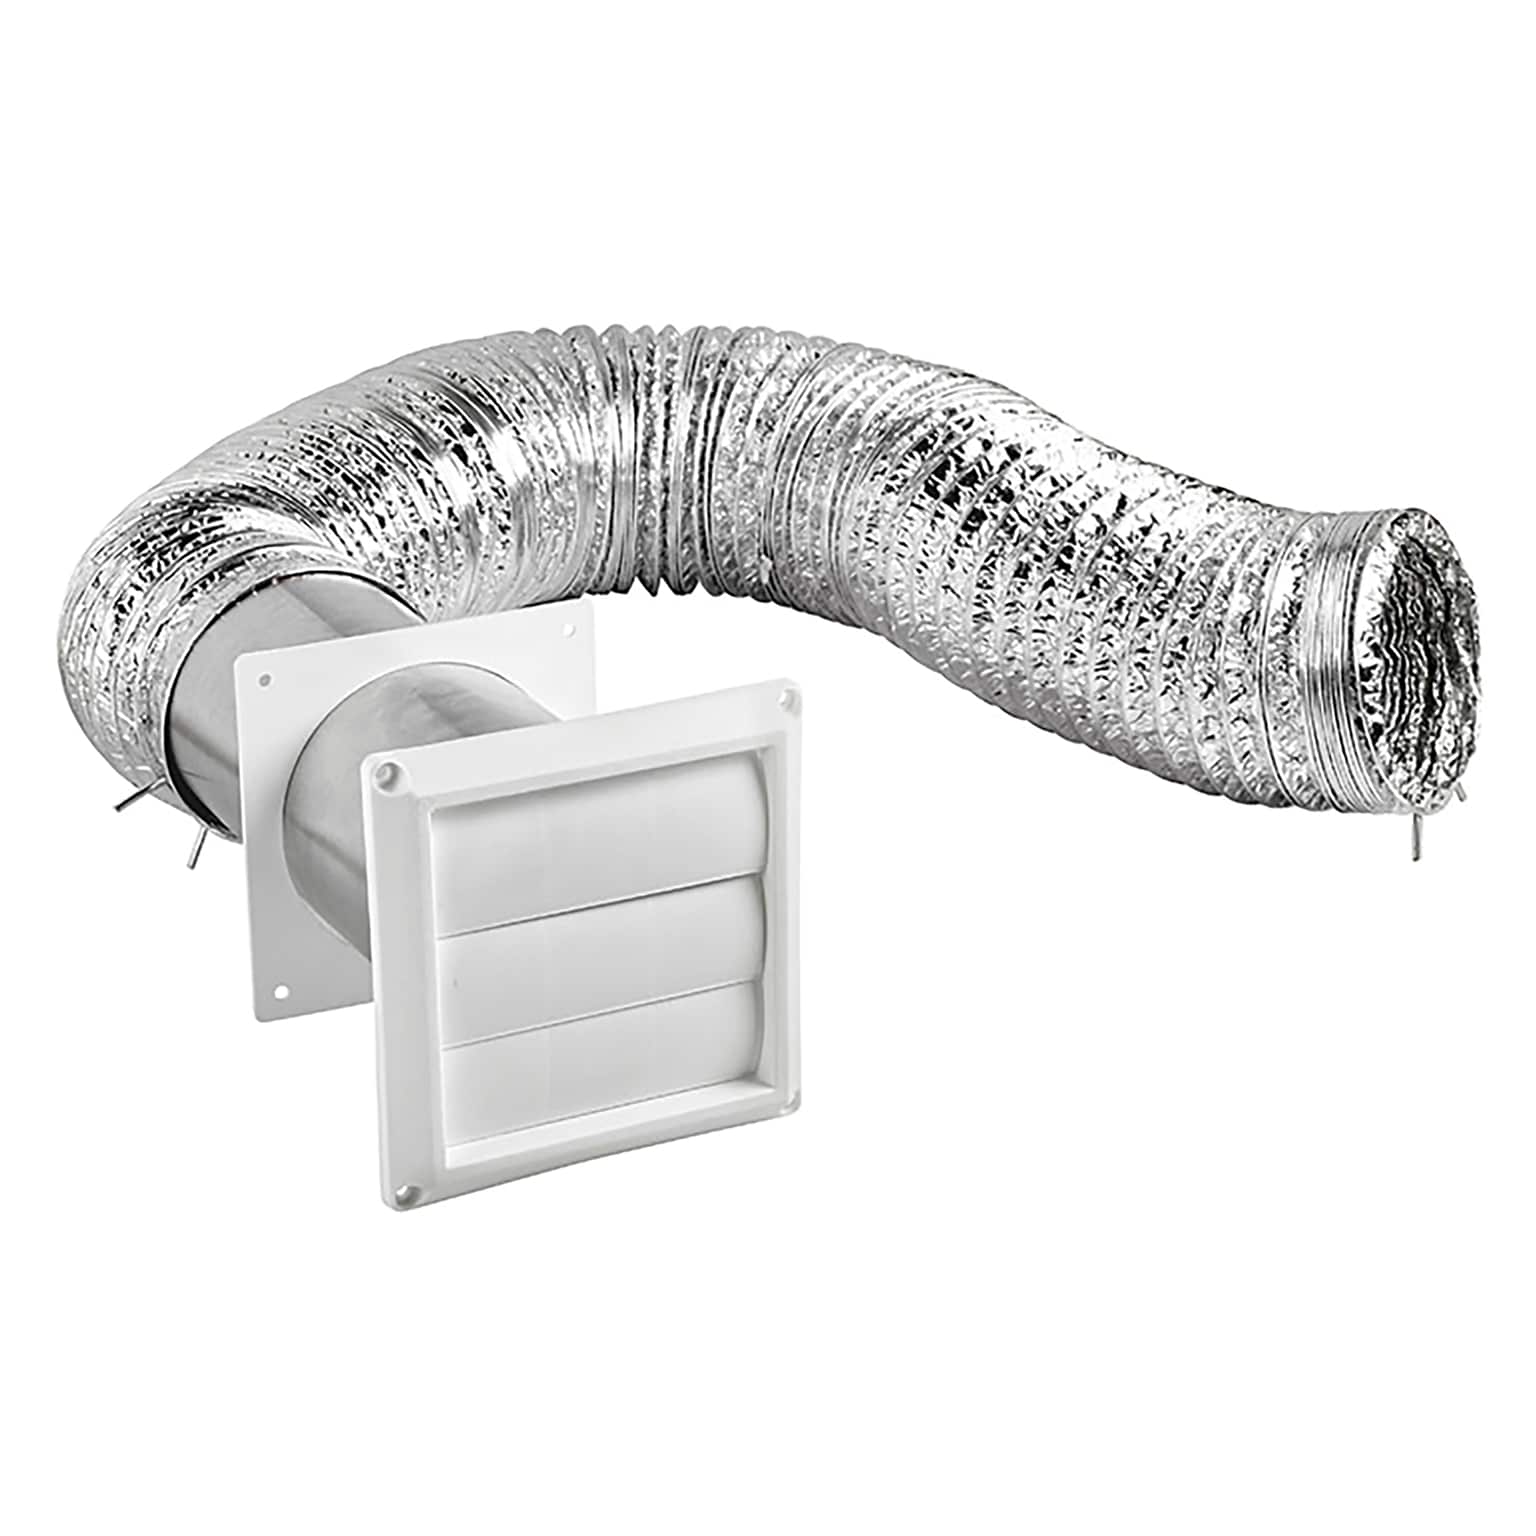 Lambro White 4 x 8 UL 2158A Transition Duct Louvered Vent Kit (1379W)